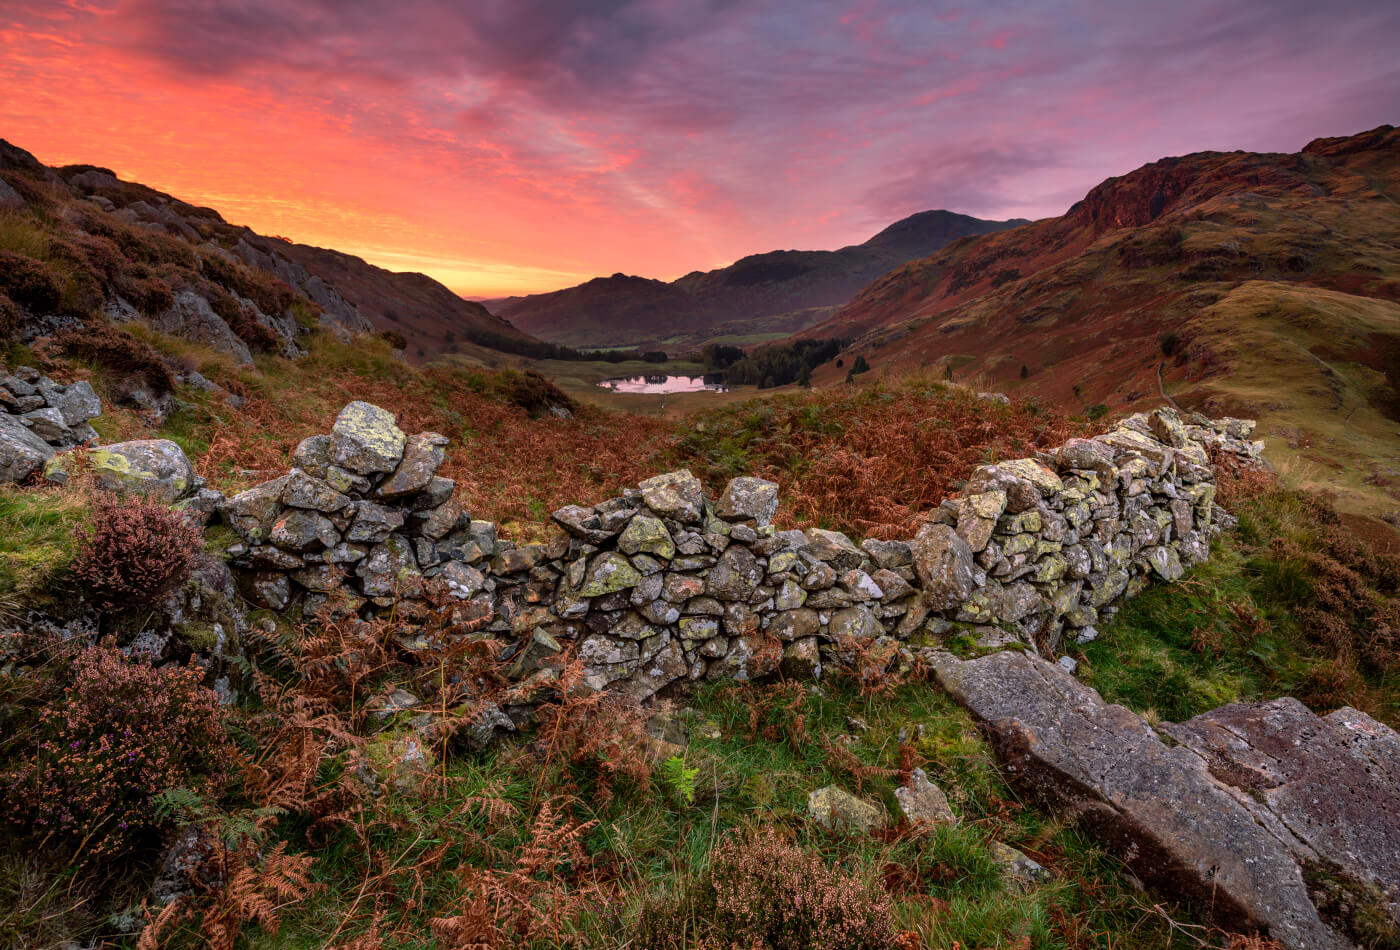 A shot of the Langdale Pikes and a stone wall at sunset